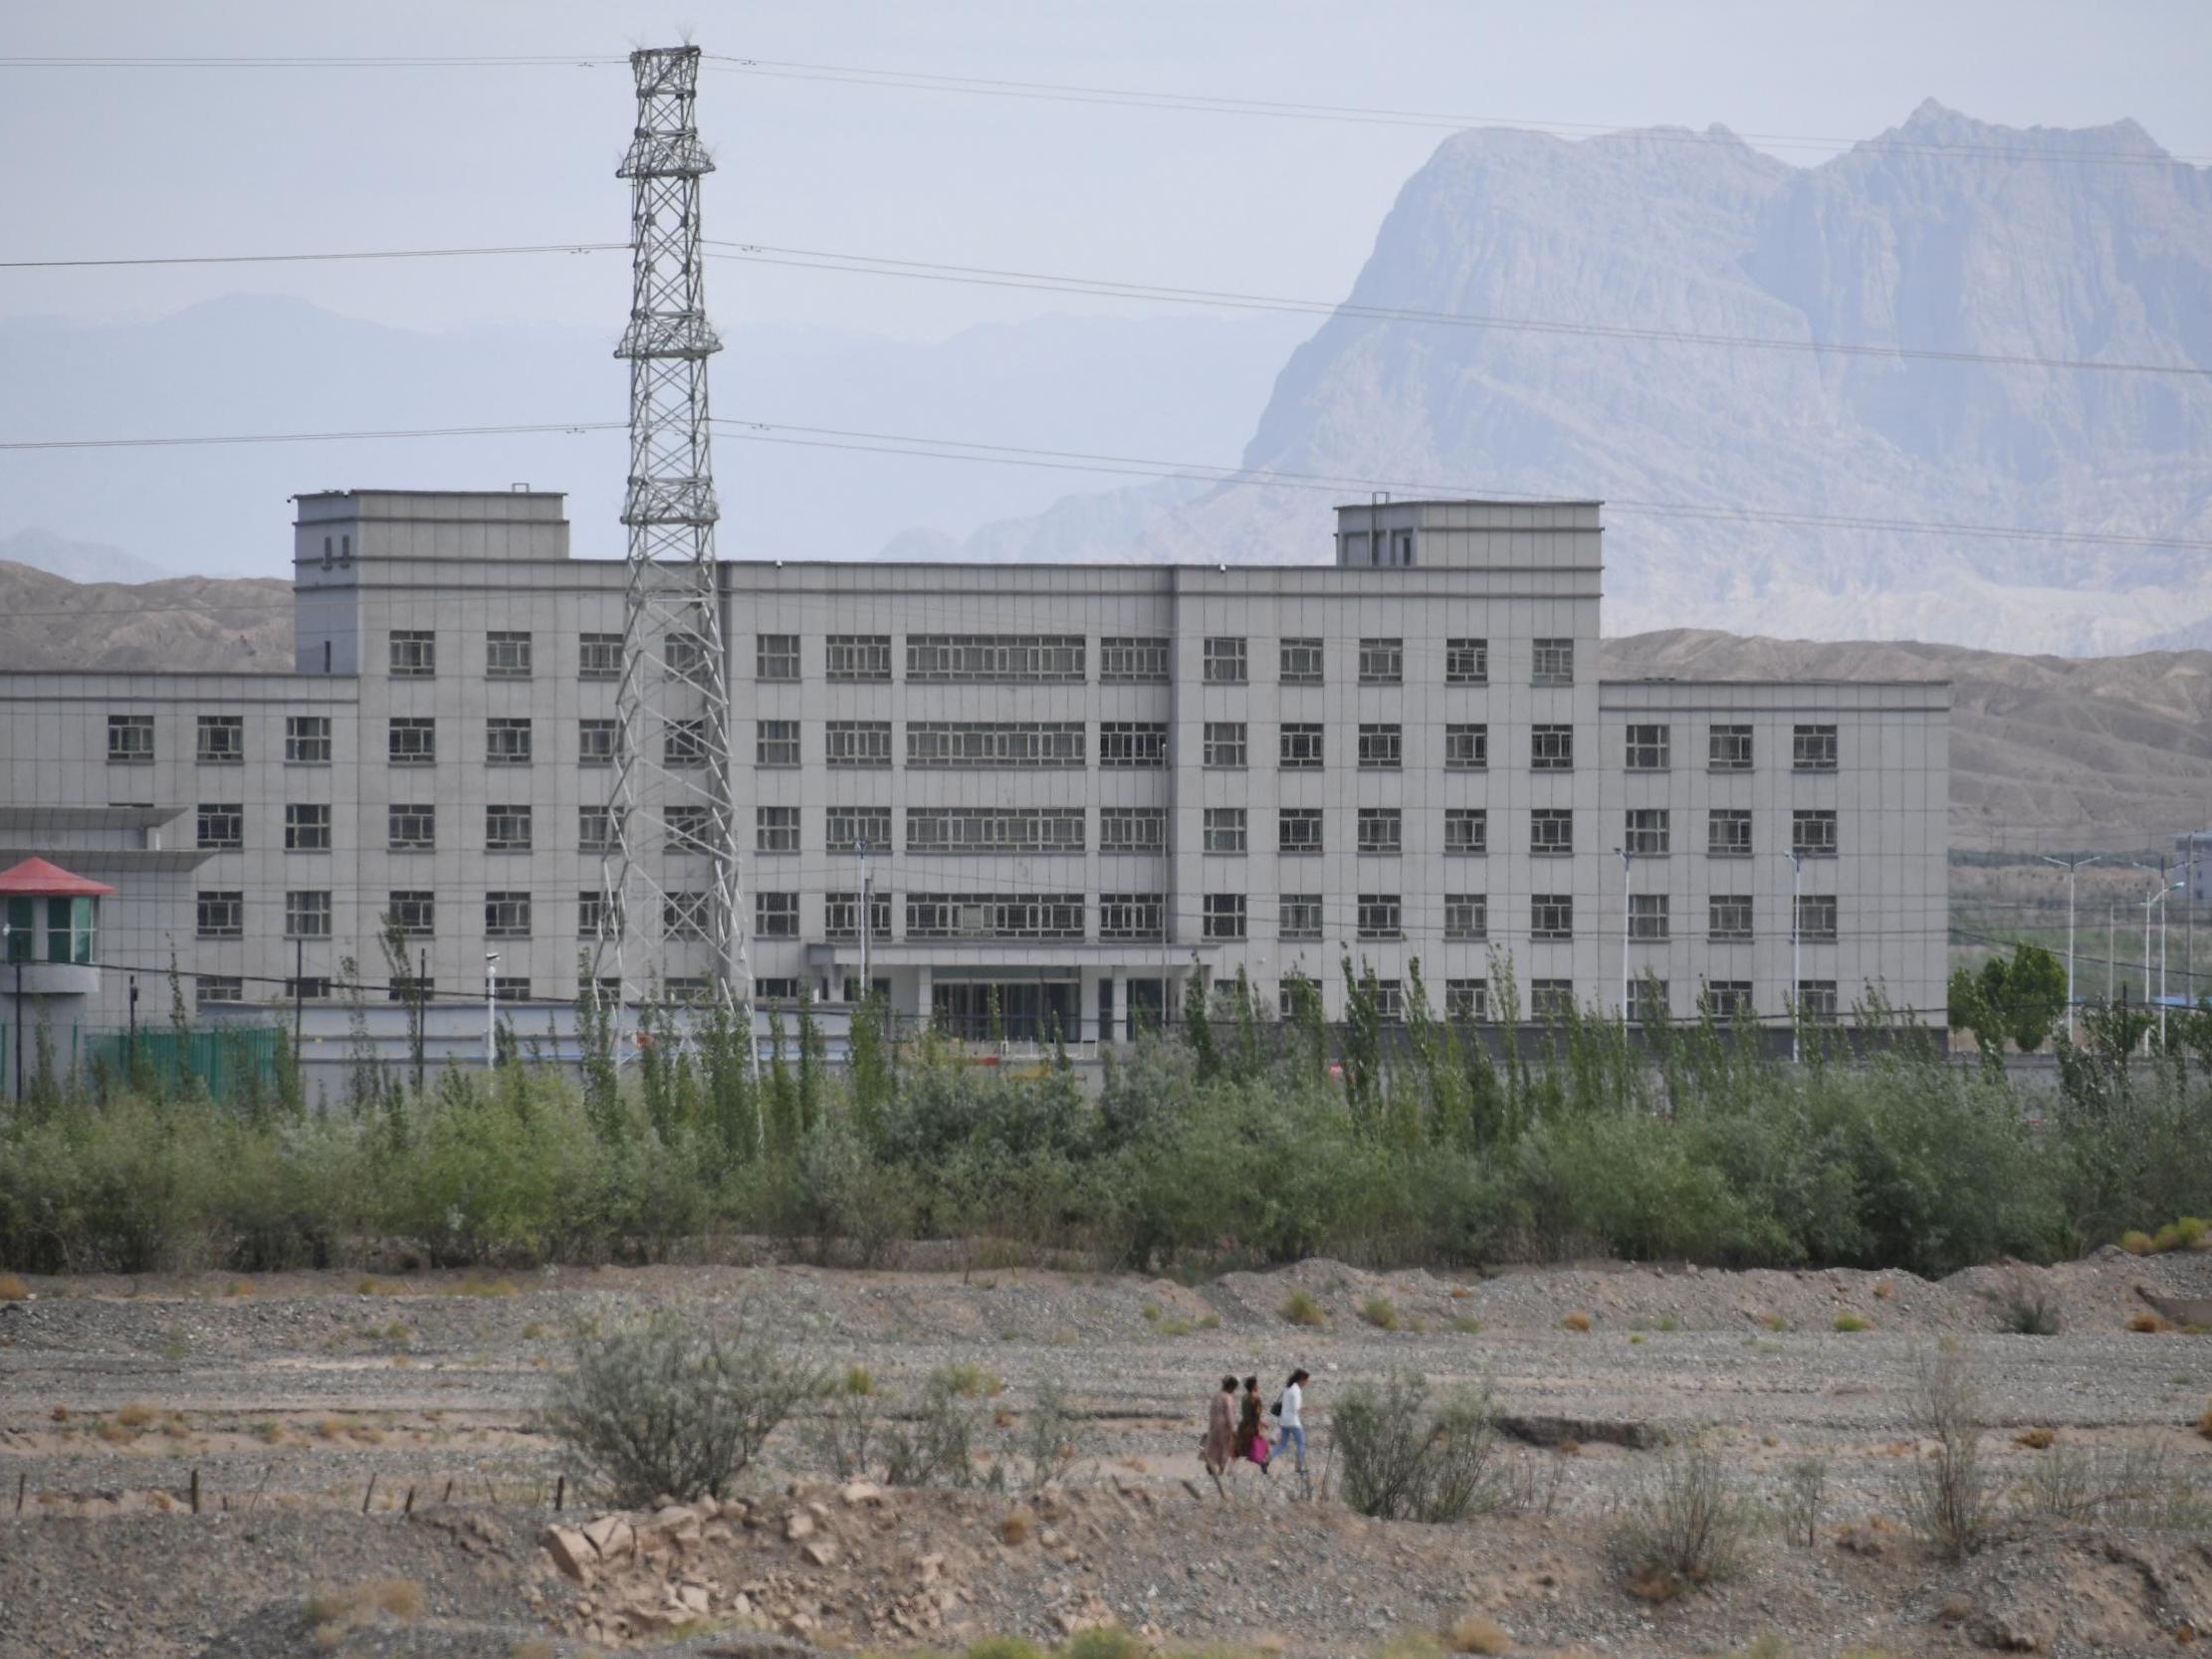 A facility believed to be a re-education camp for Uighur Muslims near Kashgar